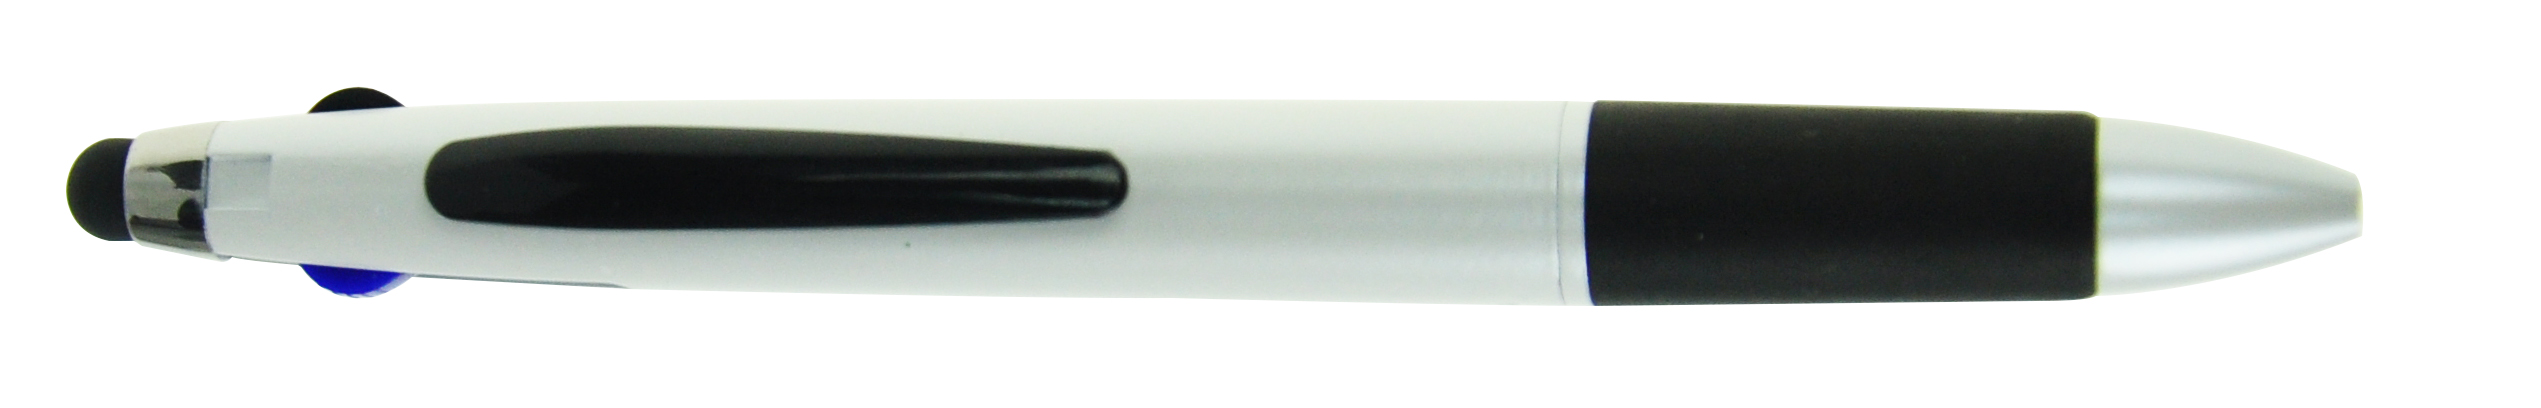 Tricolored Pen with Syles